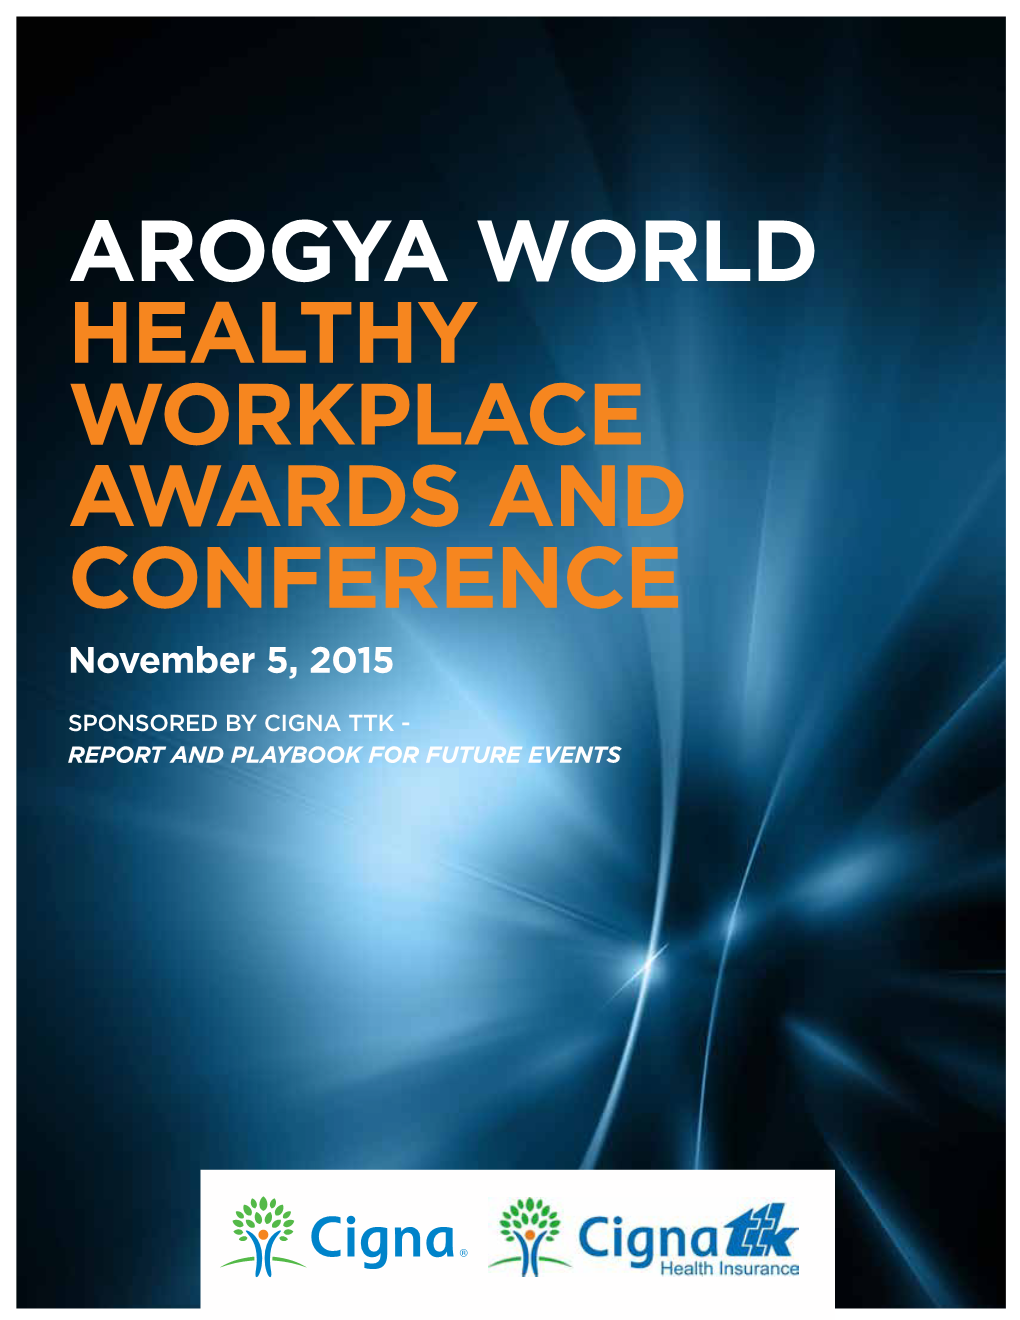 Arogya World Healthy Workplace Awards and Conference